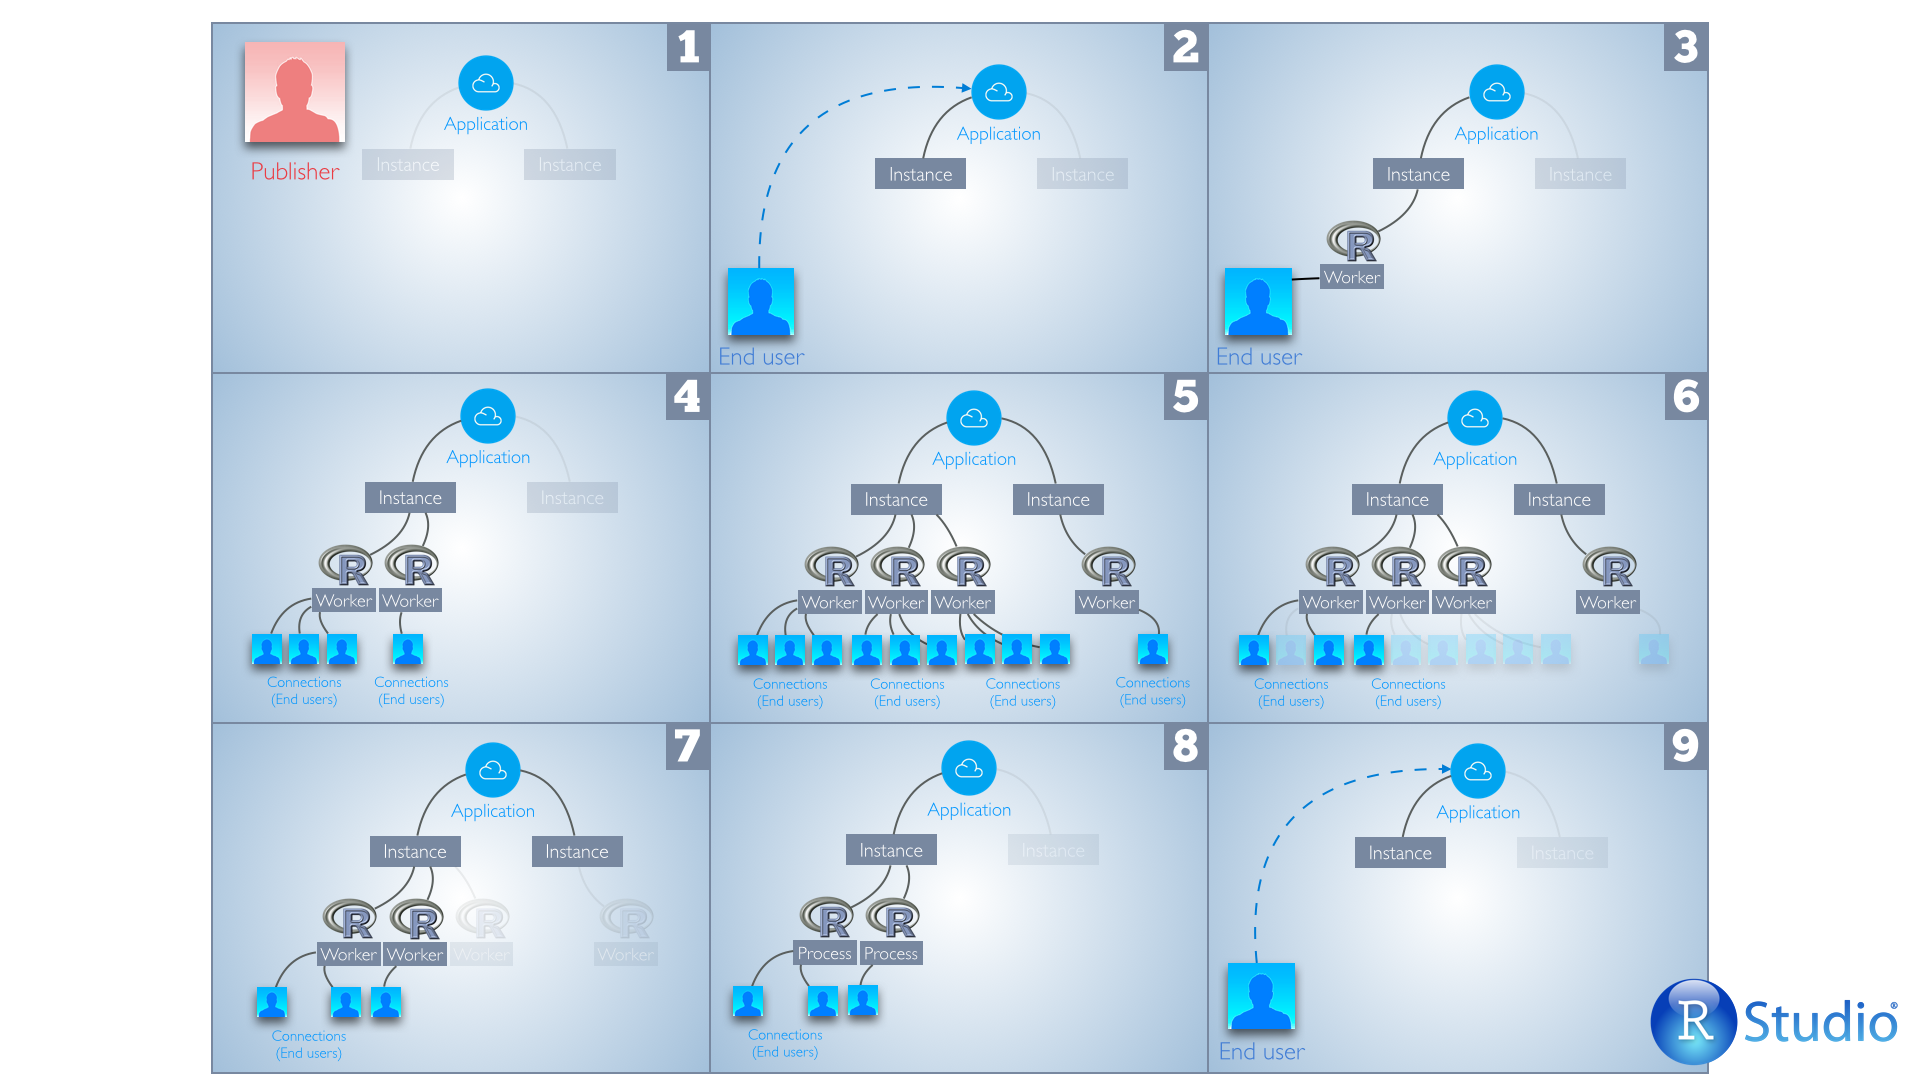 Lifecycle of an applicatoin. Starts with one application and one user and one set of connections. Progresses to multiple end users and therefore more instances and workers. Then decreases again as workers disconnect to return to one application and one worker.